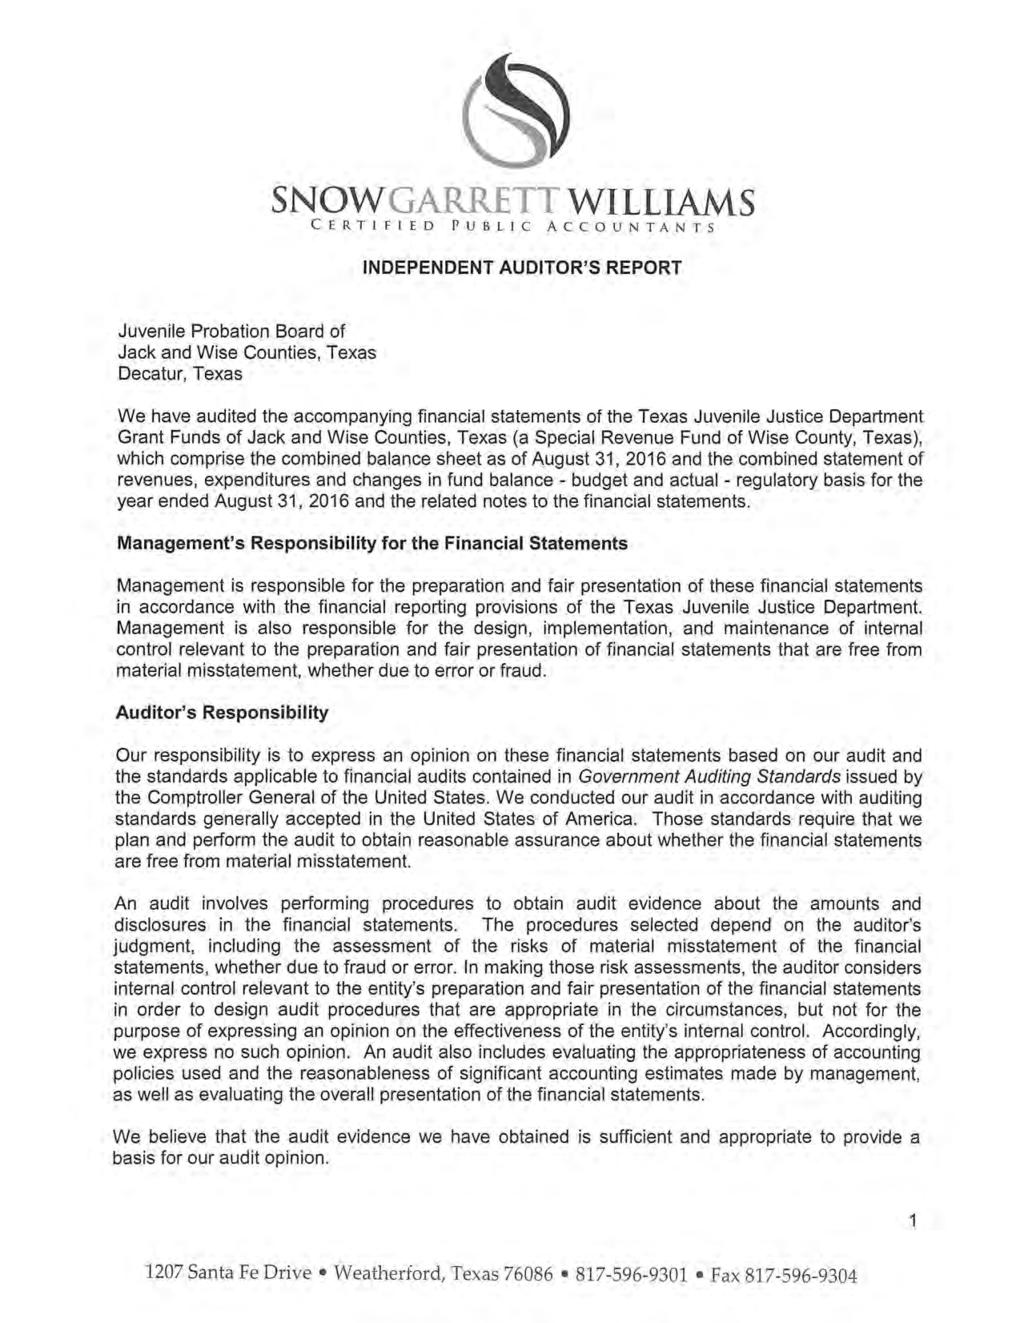 SNOW GARRETT WILLIAMS CERTIFIED PUBLIC ACCOUNTANTS INDEPENDENT AUDITOR'S REPORT Juvenile Probation Board of Jack and Wise Counties, Texas Decatur, Texas We have audited the accompanying financial